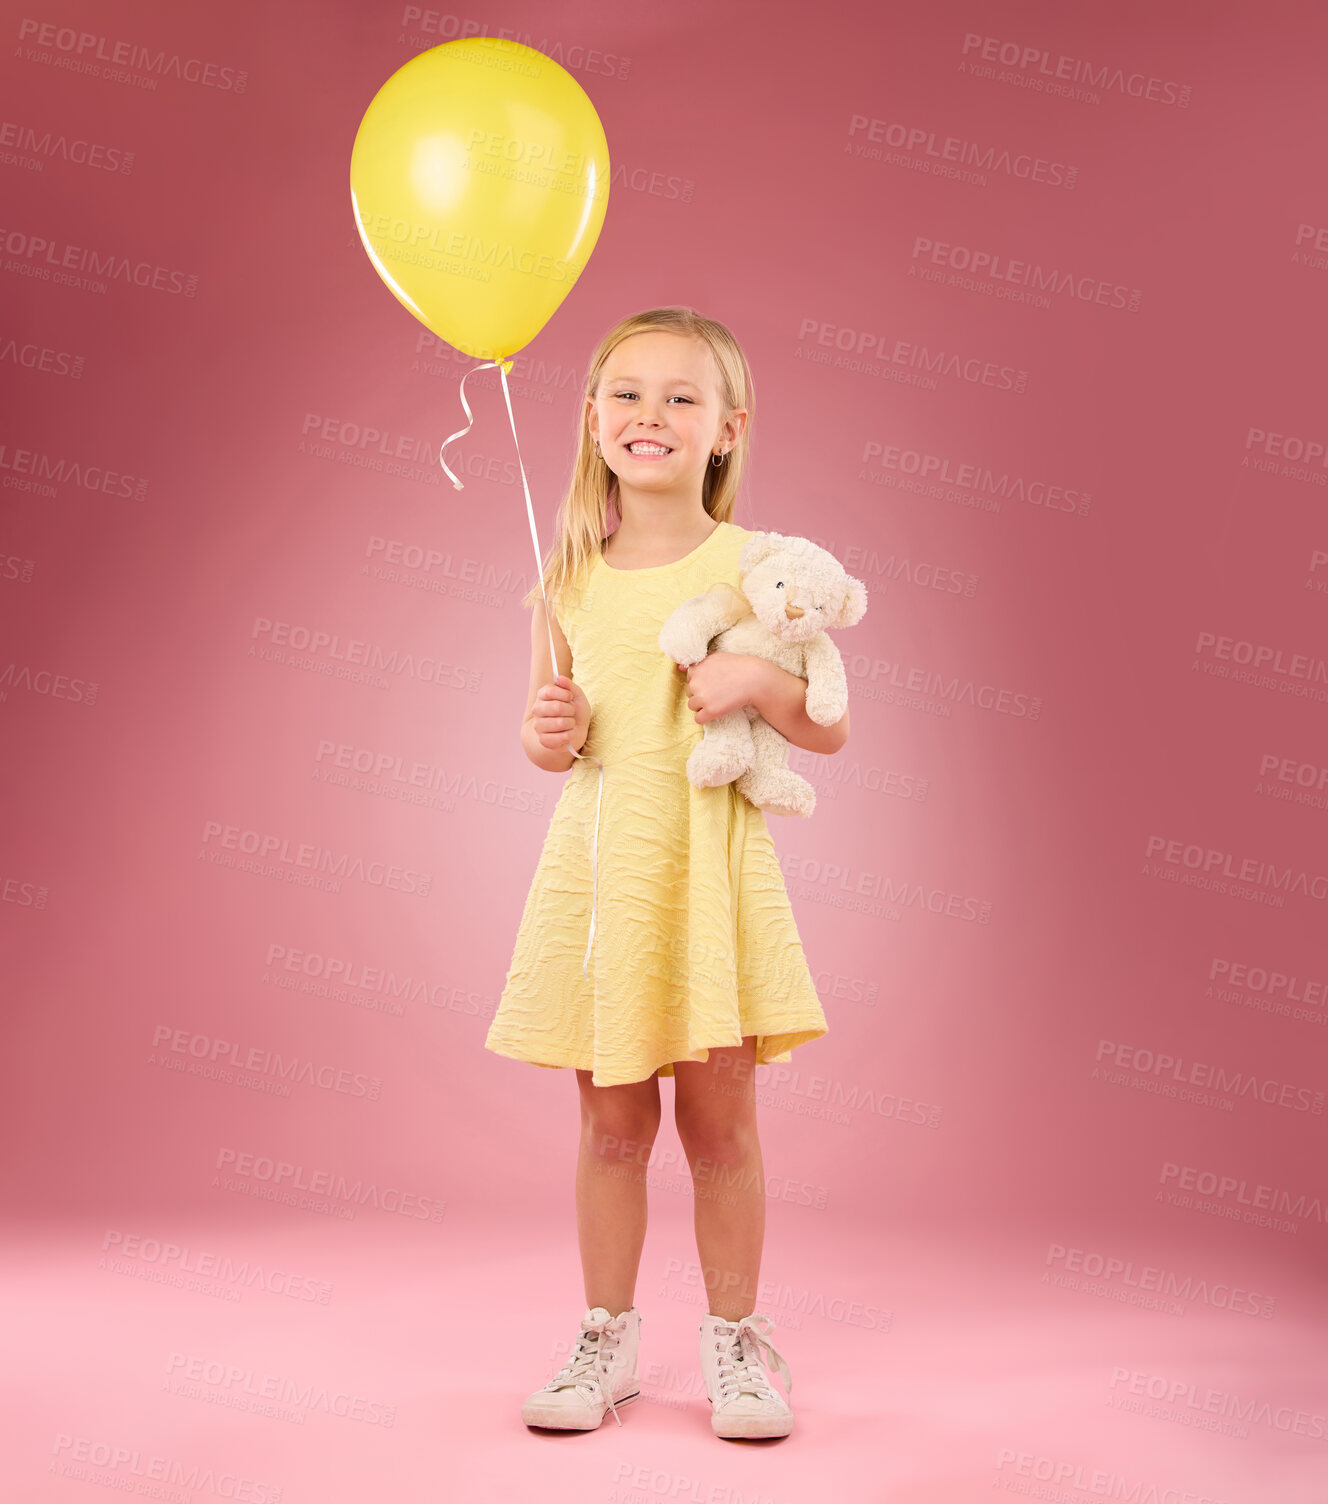 Buy stock photo Teddy bear, girl balloon and portrait with a soft toy with happiness and love for celebration in studio. Isolated, pink background and a young female feeling happy, joy and cheerful with friend